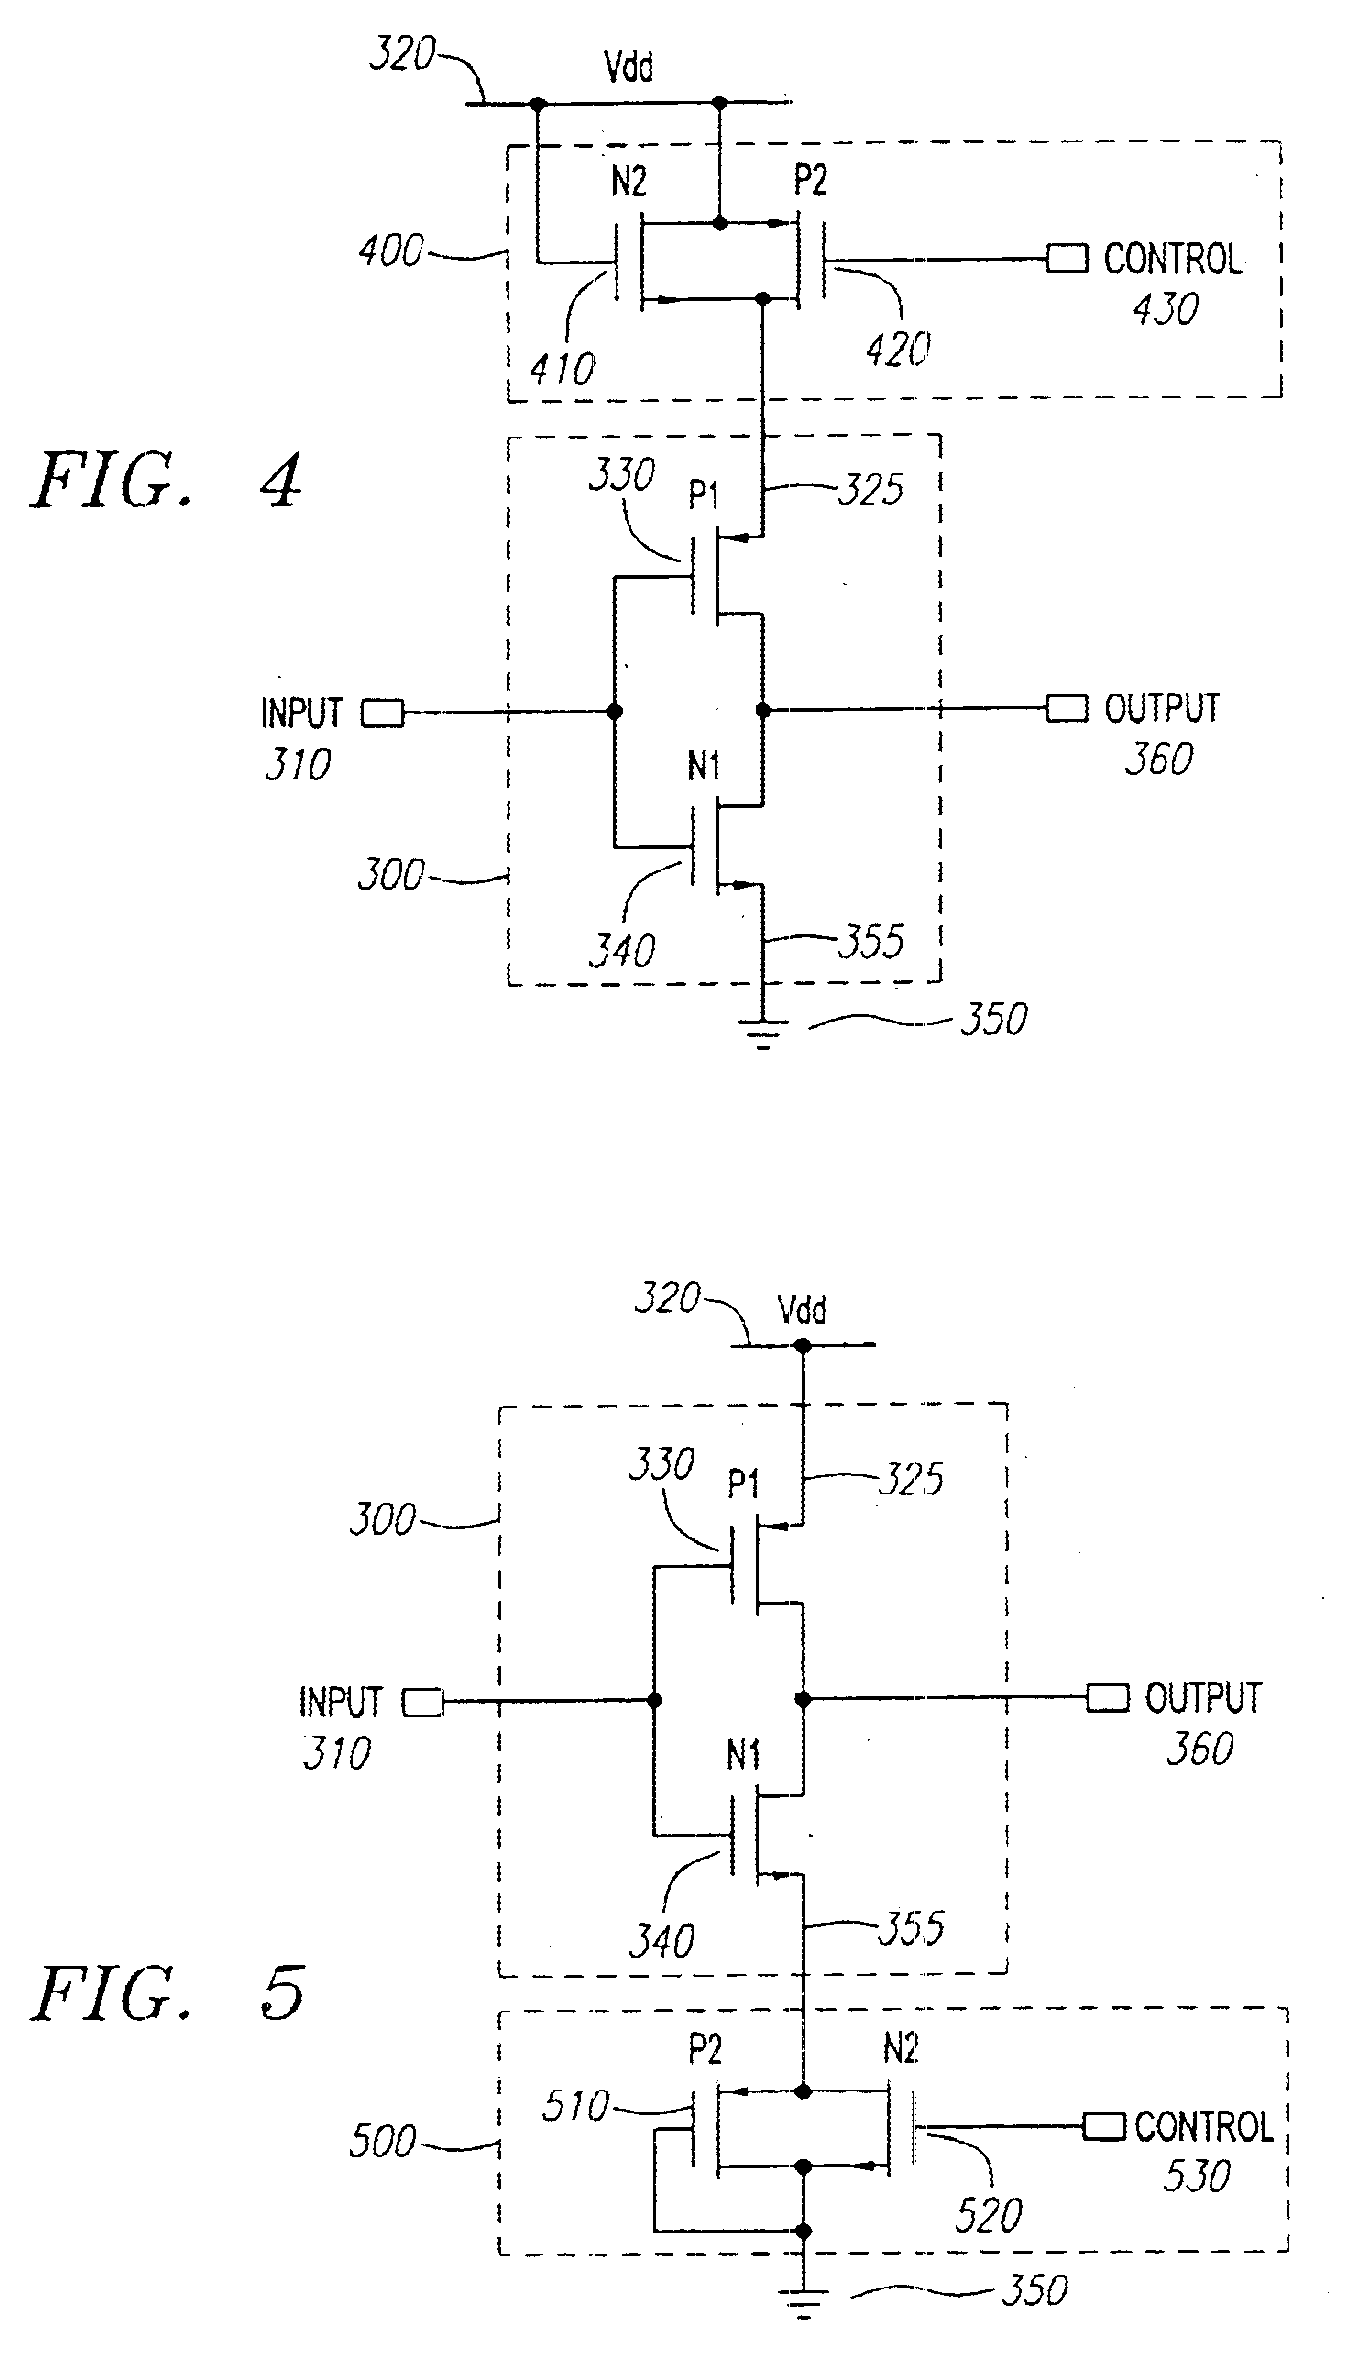 Low-power voltage modulation circuit for pass devices